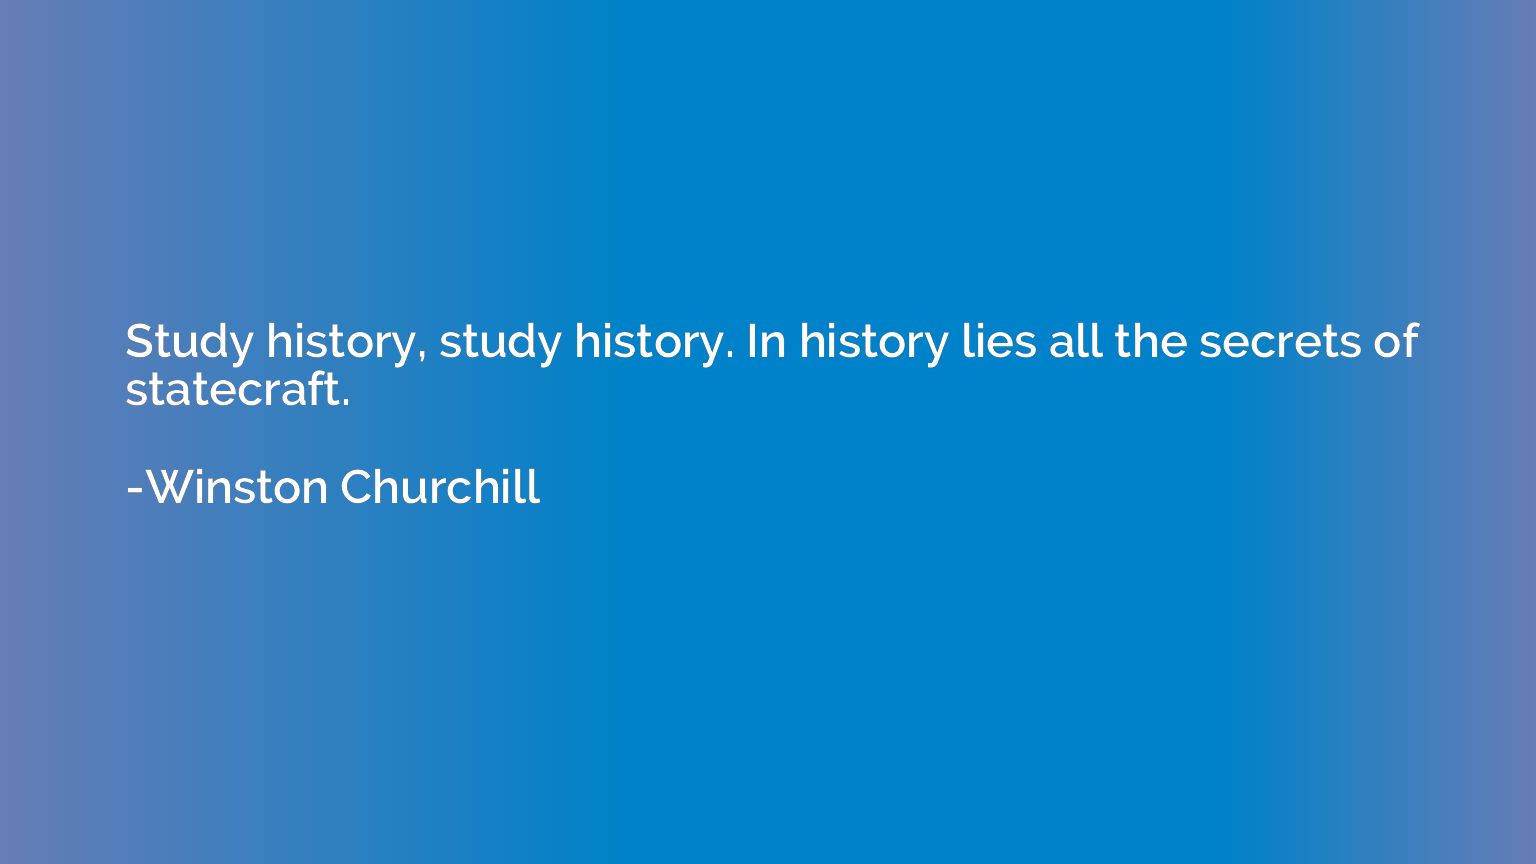 Study history, study history. In history lies all the secret